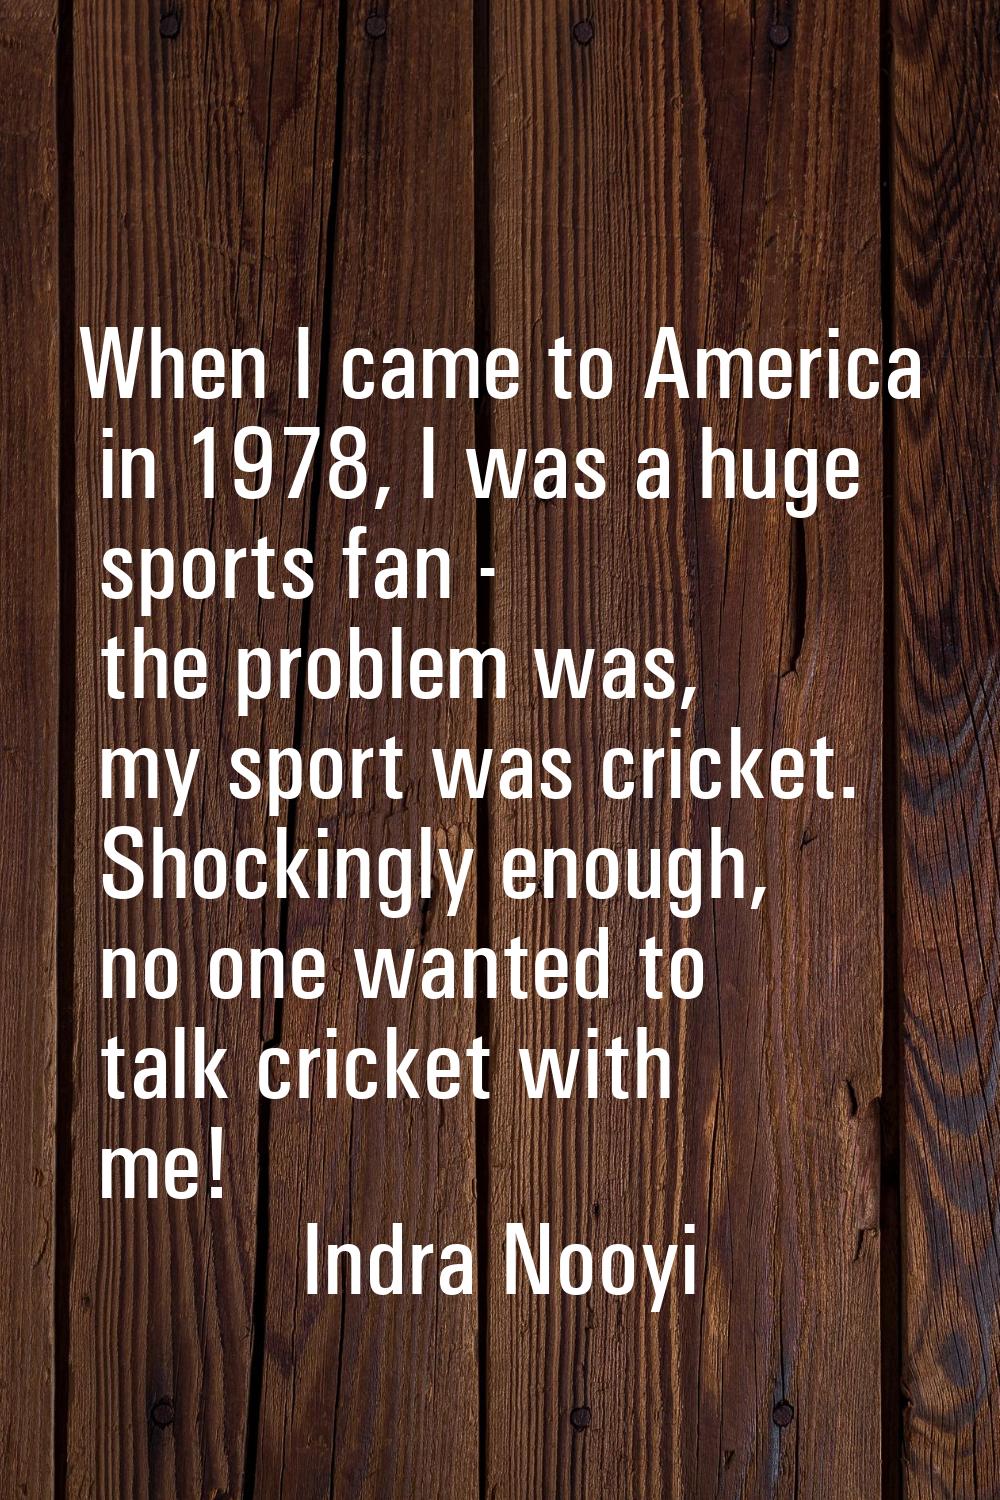 When I came to America in 1978, I was a huge sports fan - the problem was, my sport was cricket. Sh